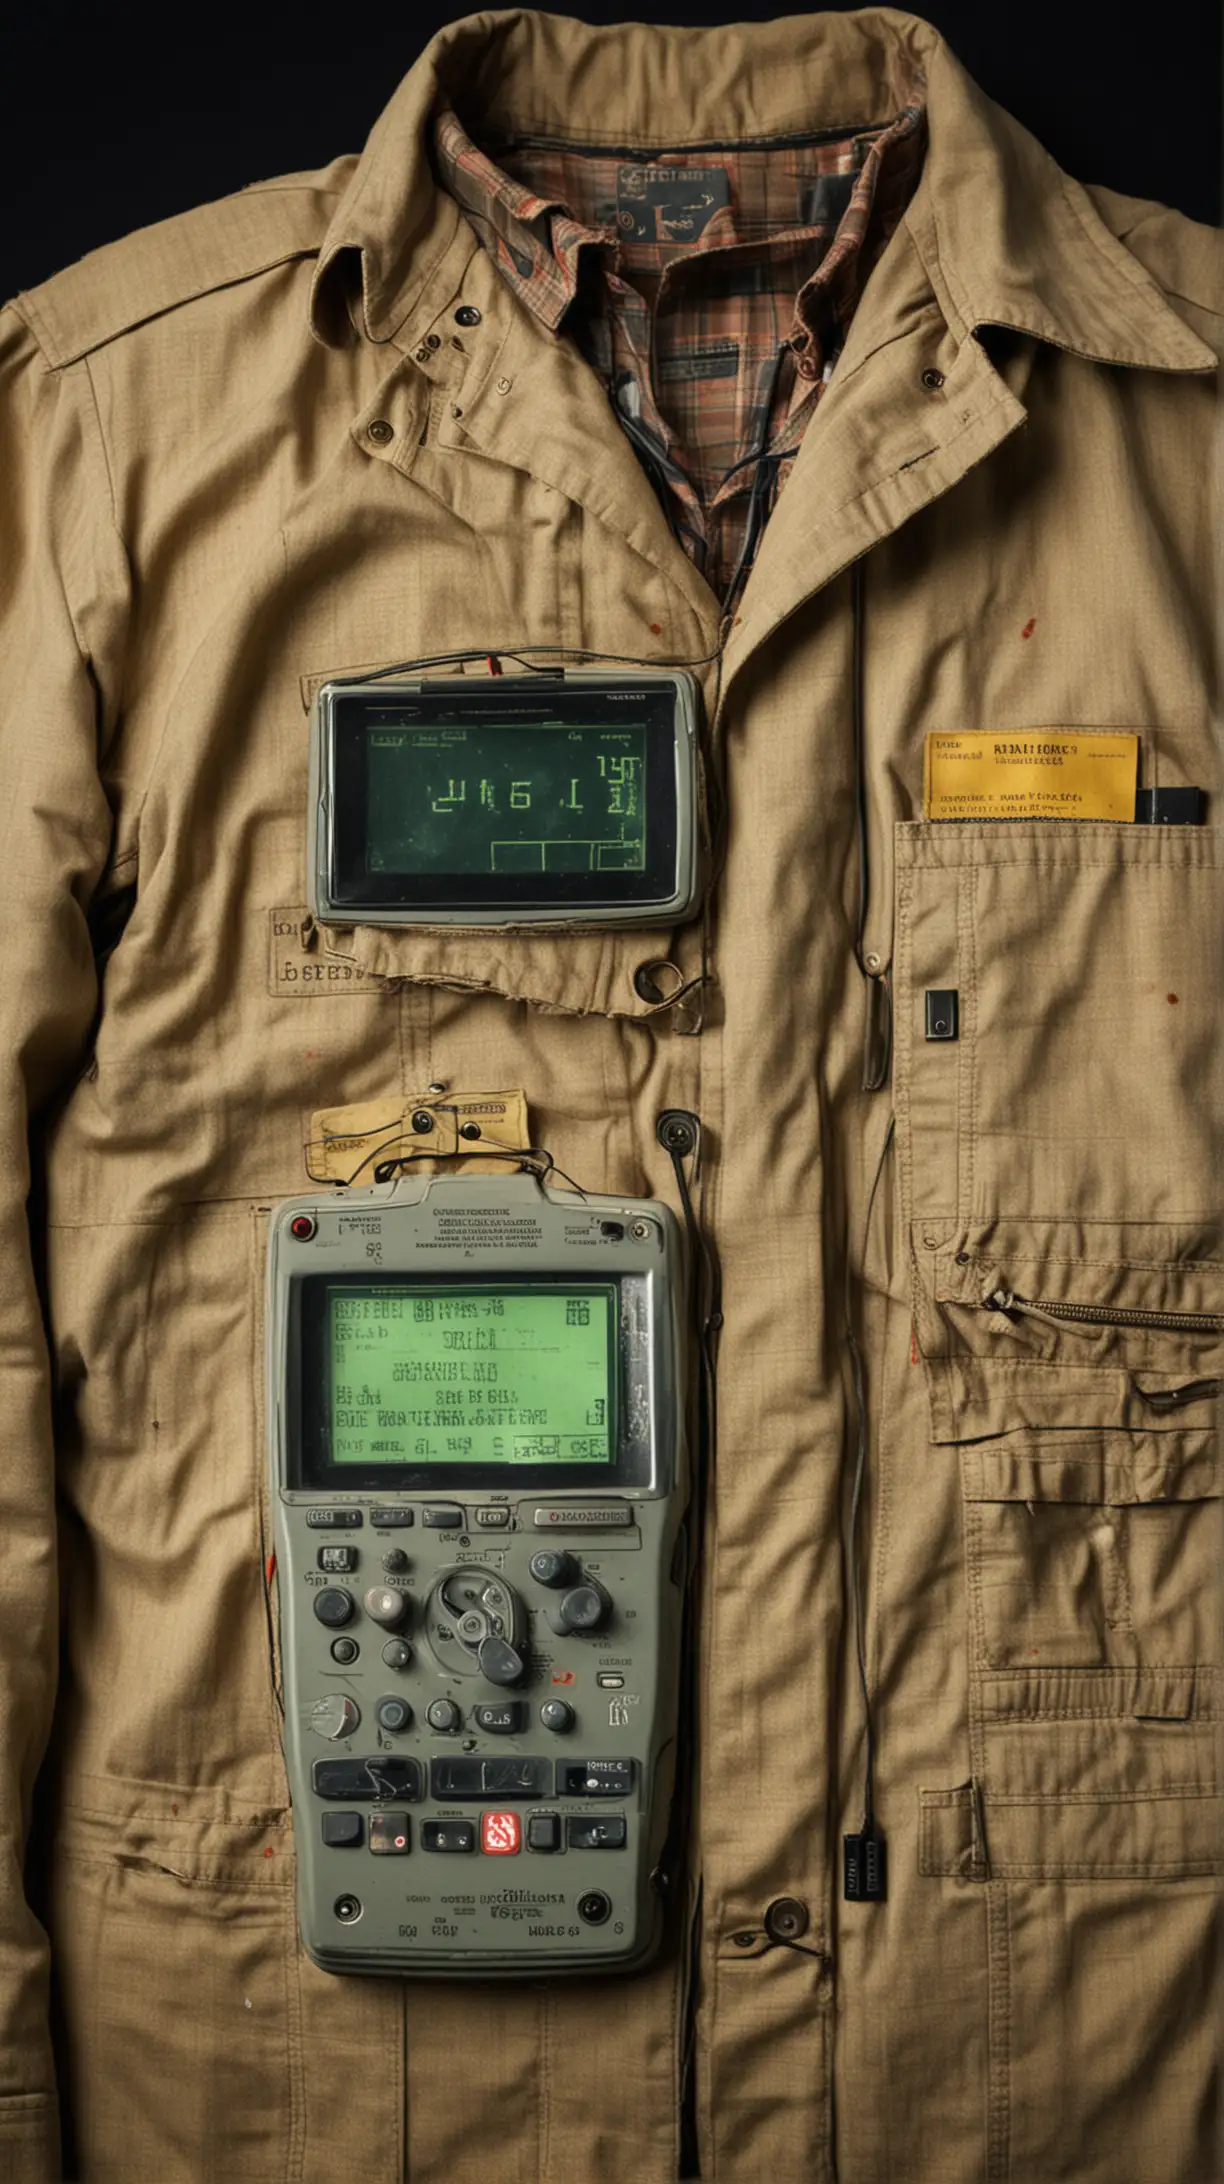 Geiger Counters Detecting Radiation on Deceased Clothing